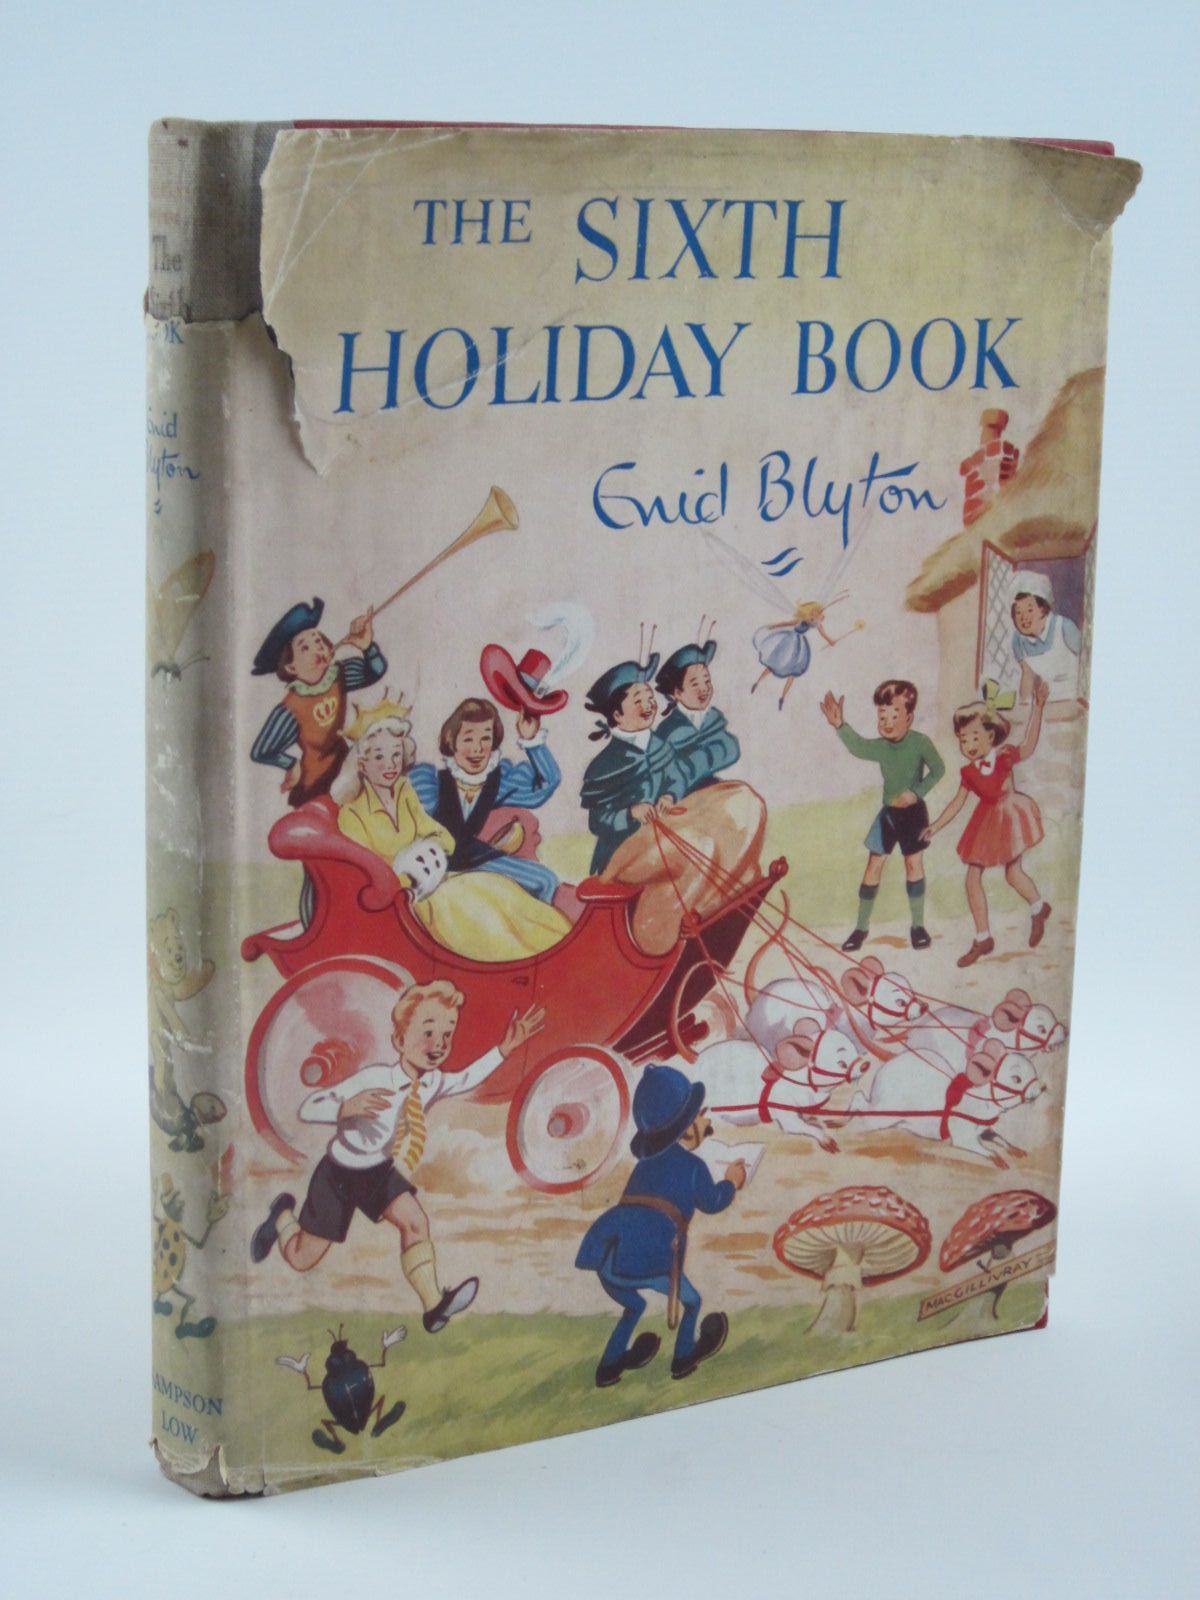 Photo of THE SIXTH HOLIDAY BOOK written by Blyton, Enid illustrated by Steed, Cicely
MacGillivray, Robert
McGavin, Hilda
Sheppard, Raymond
et al.,  published by Sampson Low, Marston & Co. Ltd. (STOCK CODE: 1501297)  for sale by Stella & Rose's Books